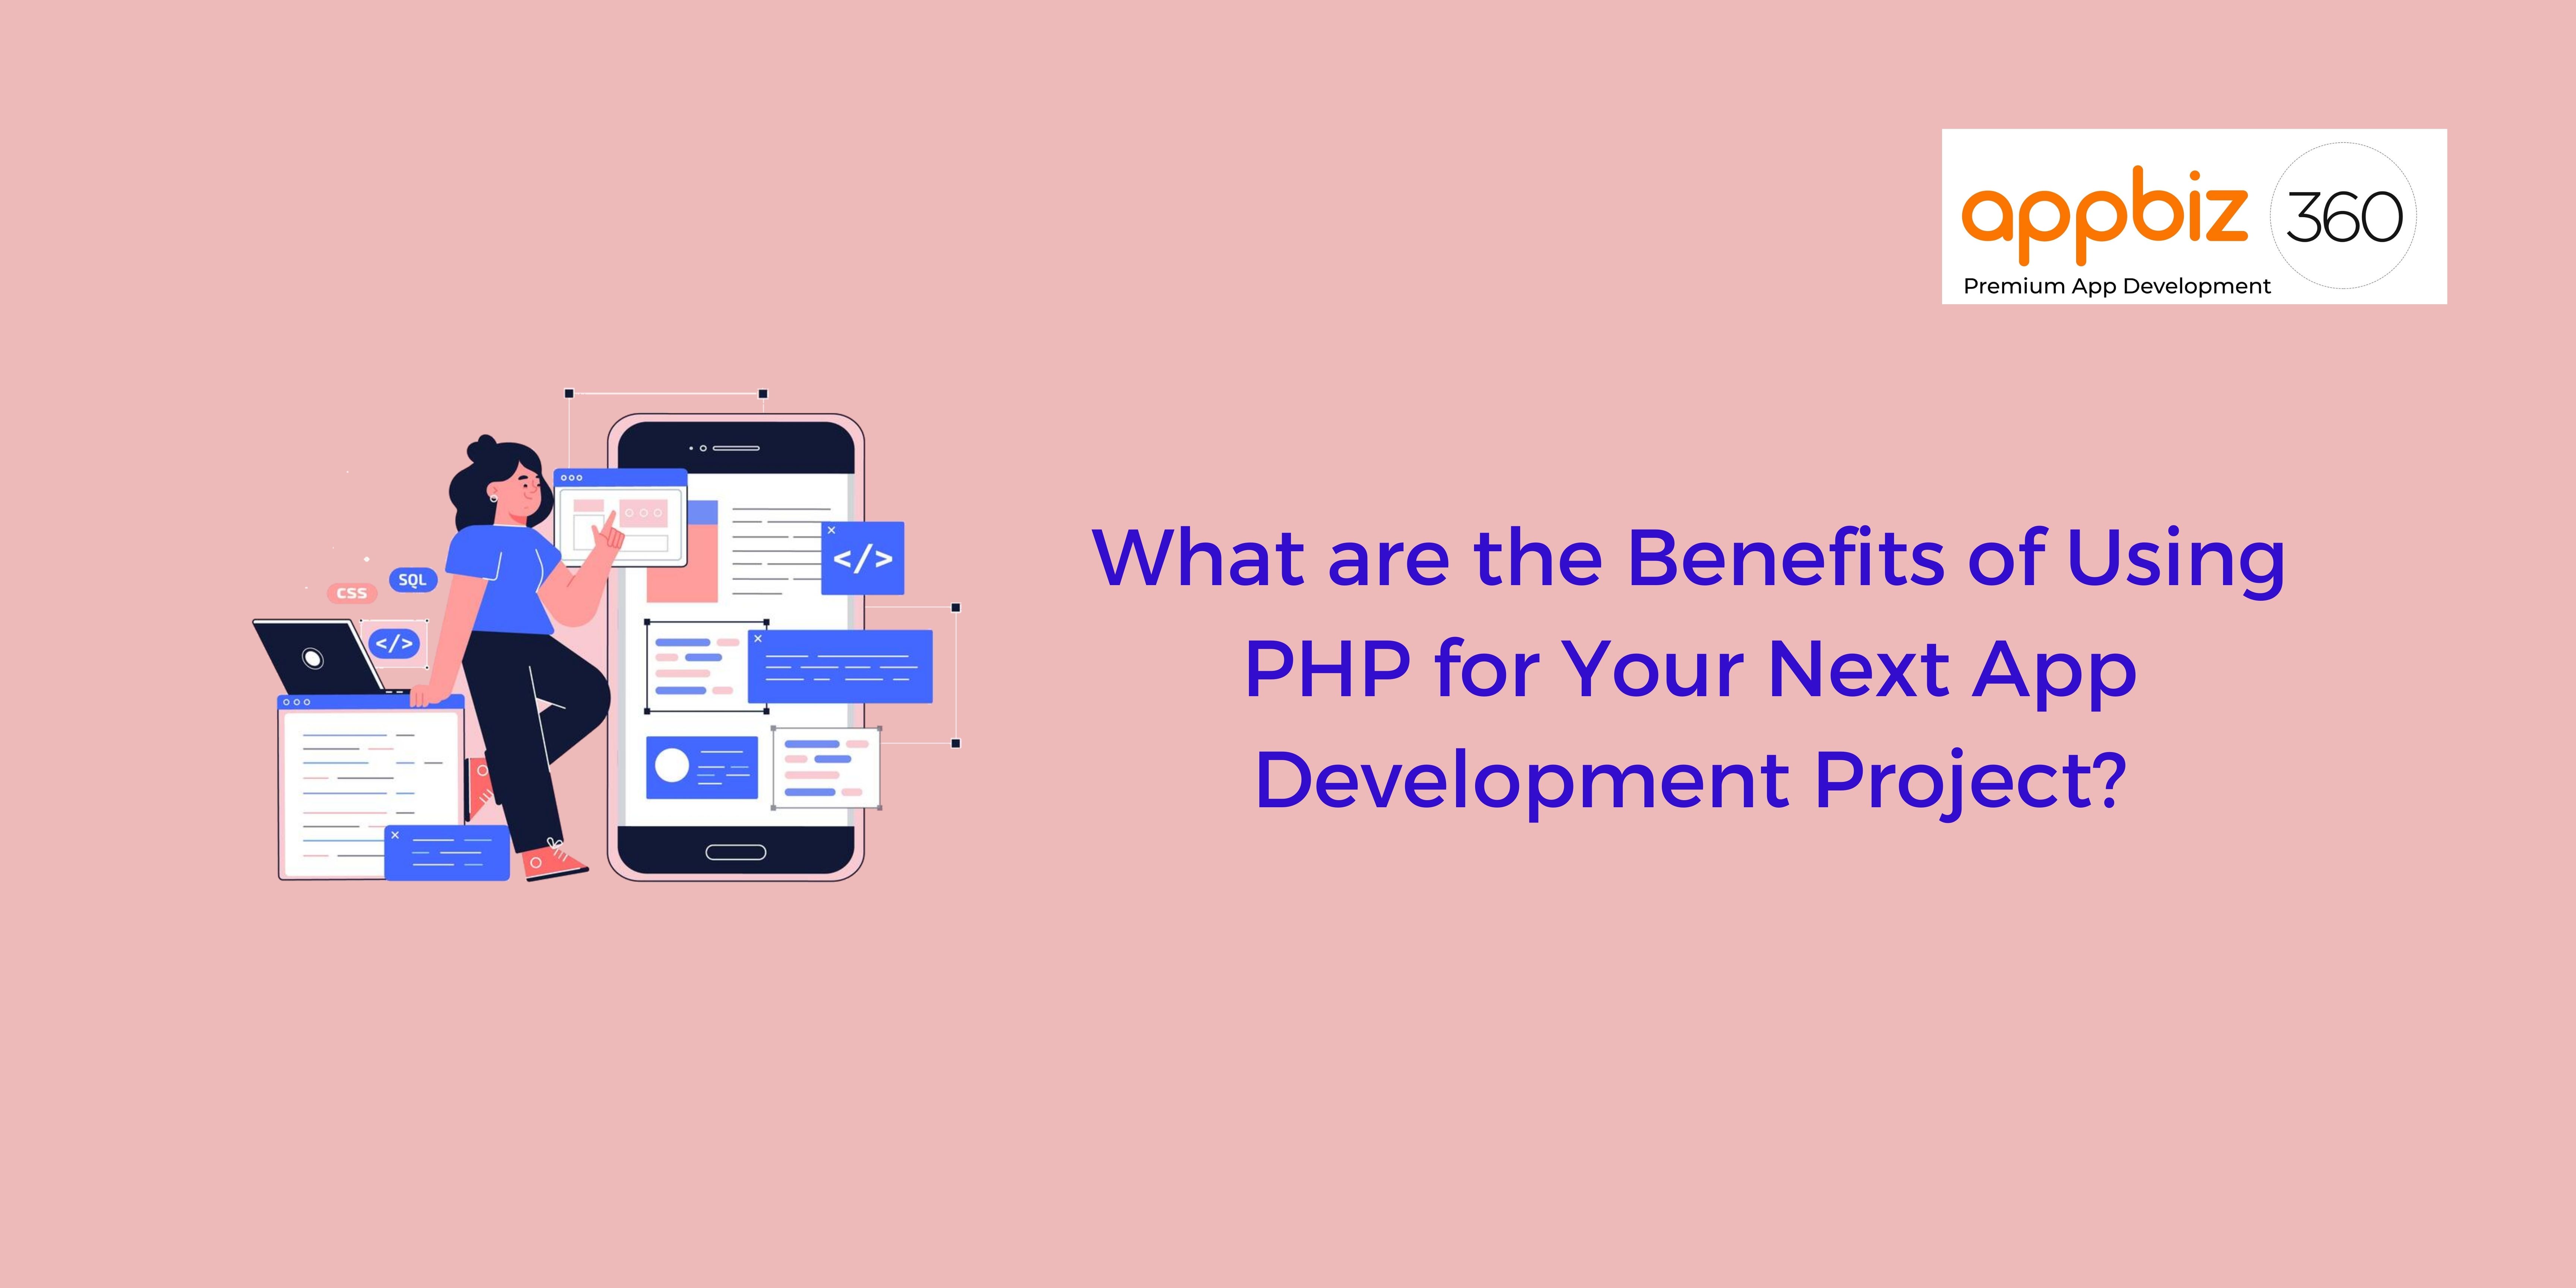 What are the Benefits of Using PHP for Your Next App Development Project?